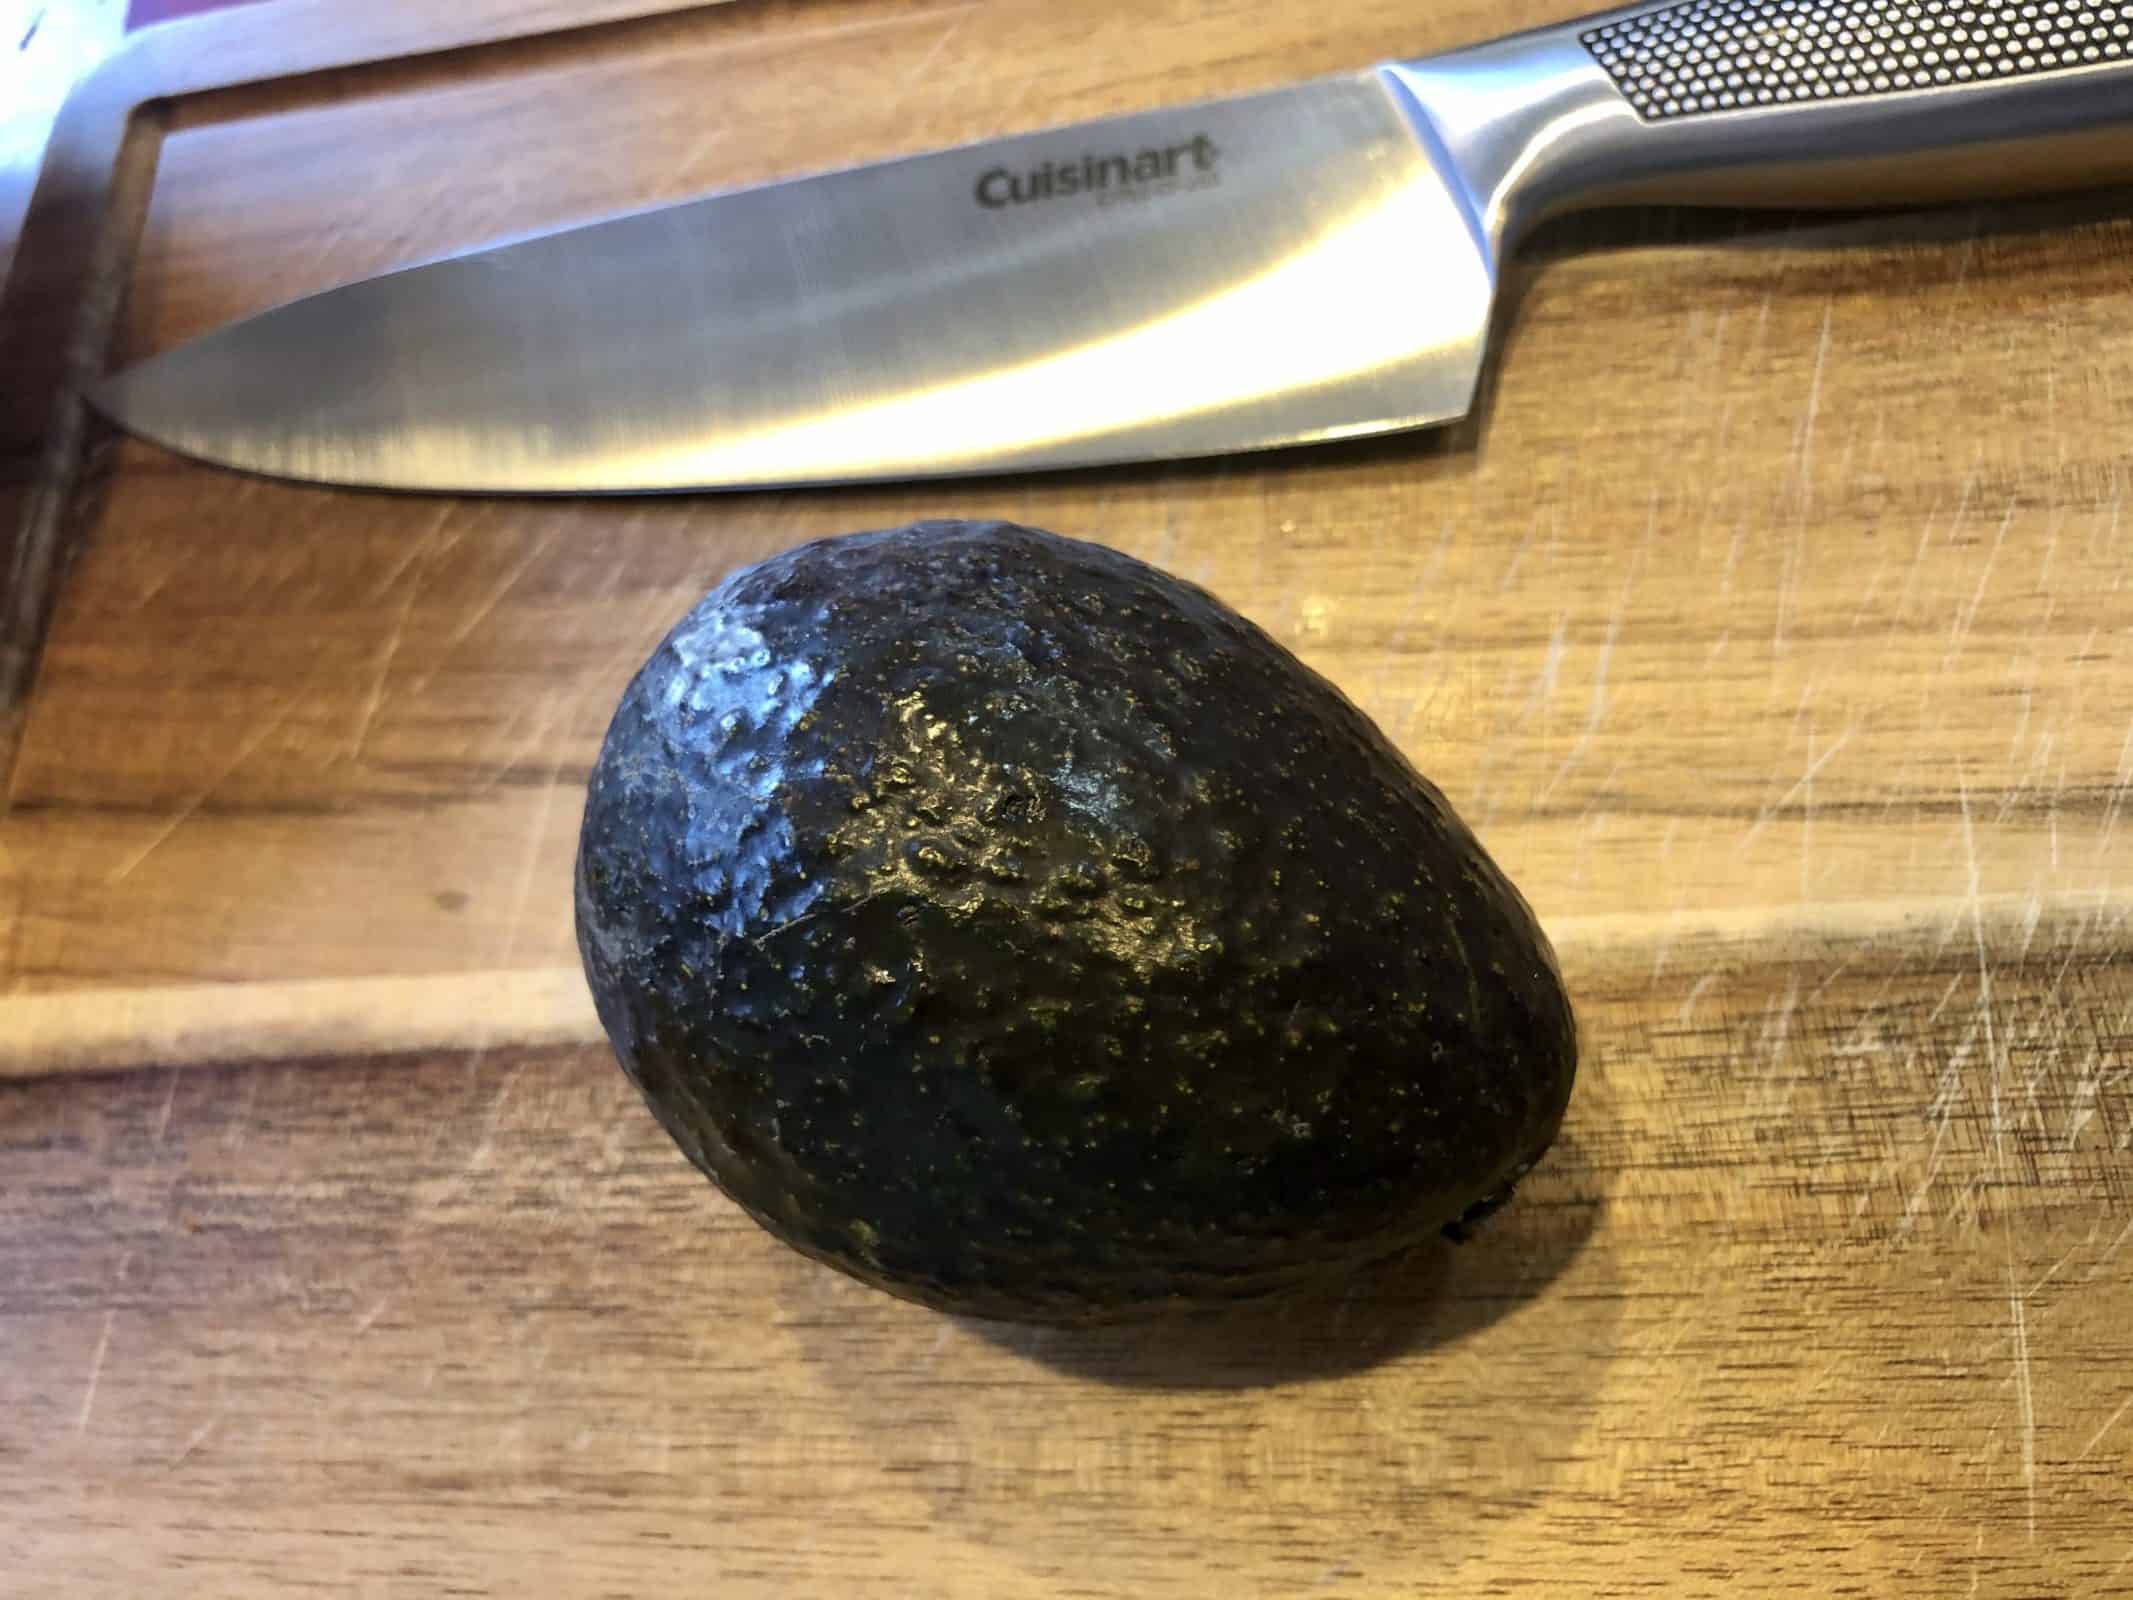 Fresh Avocado sitting on a wooden cutting board with a stainless steel knife